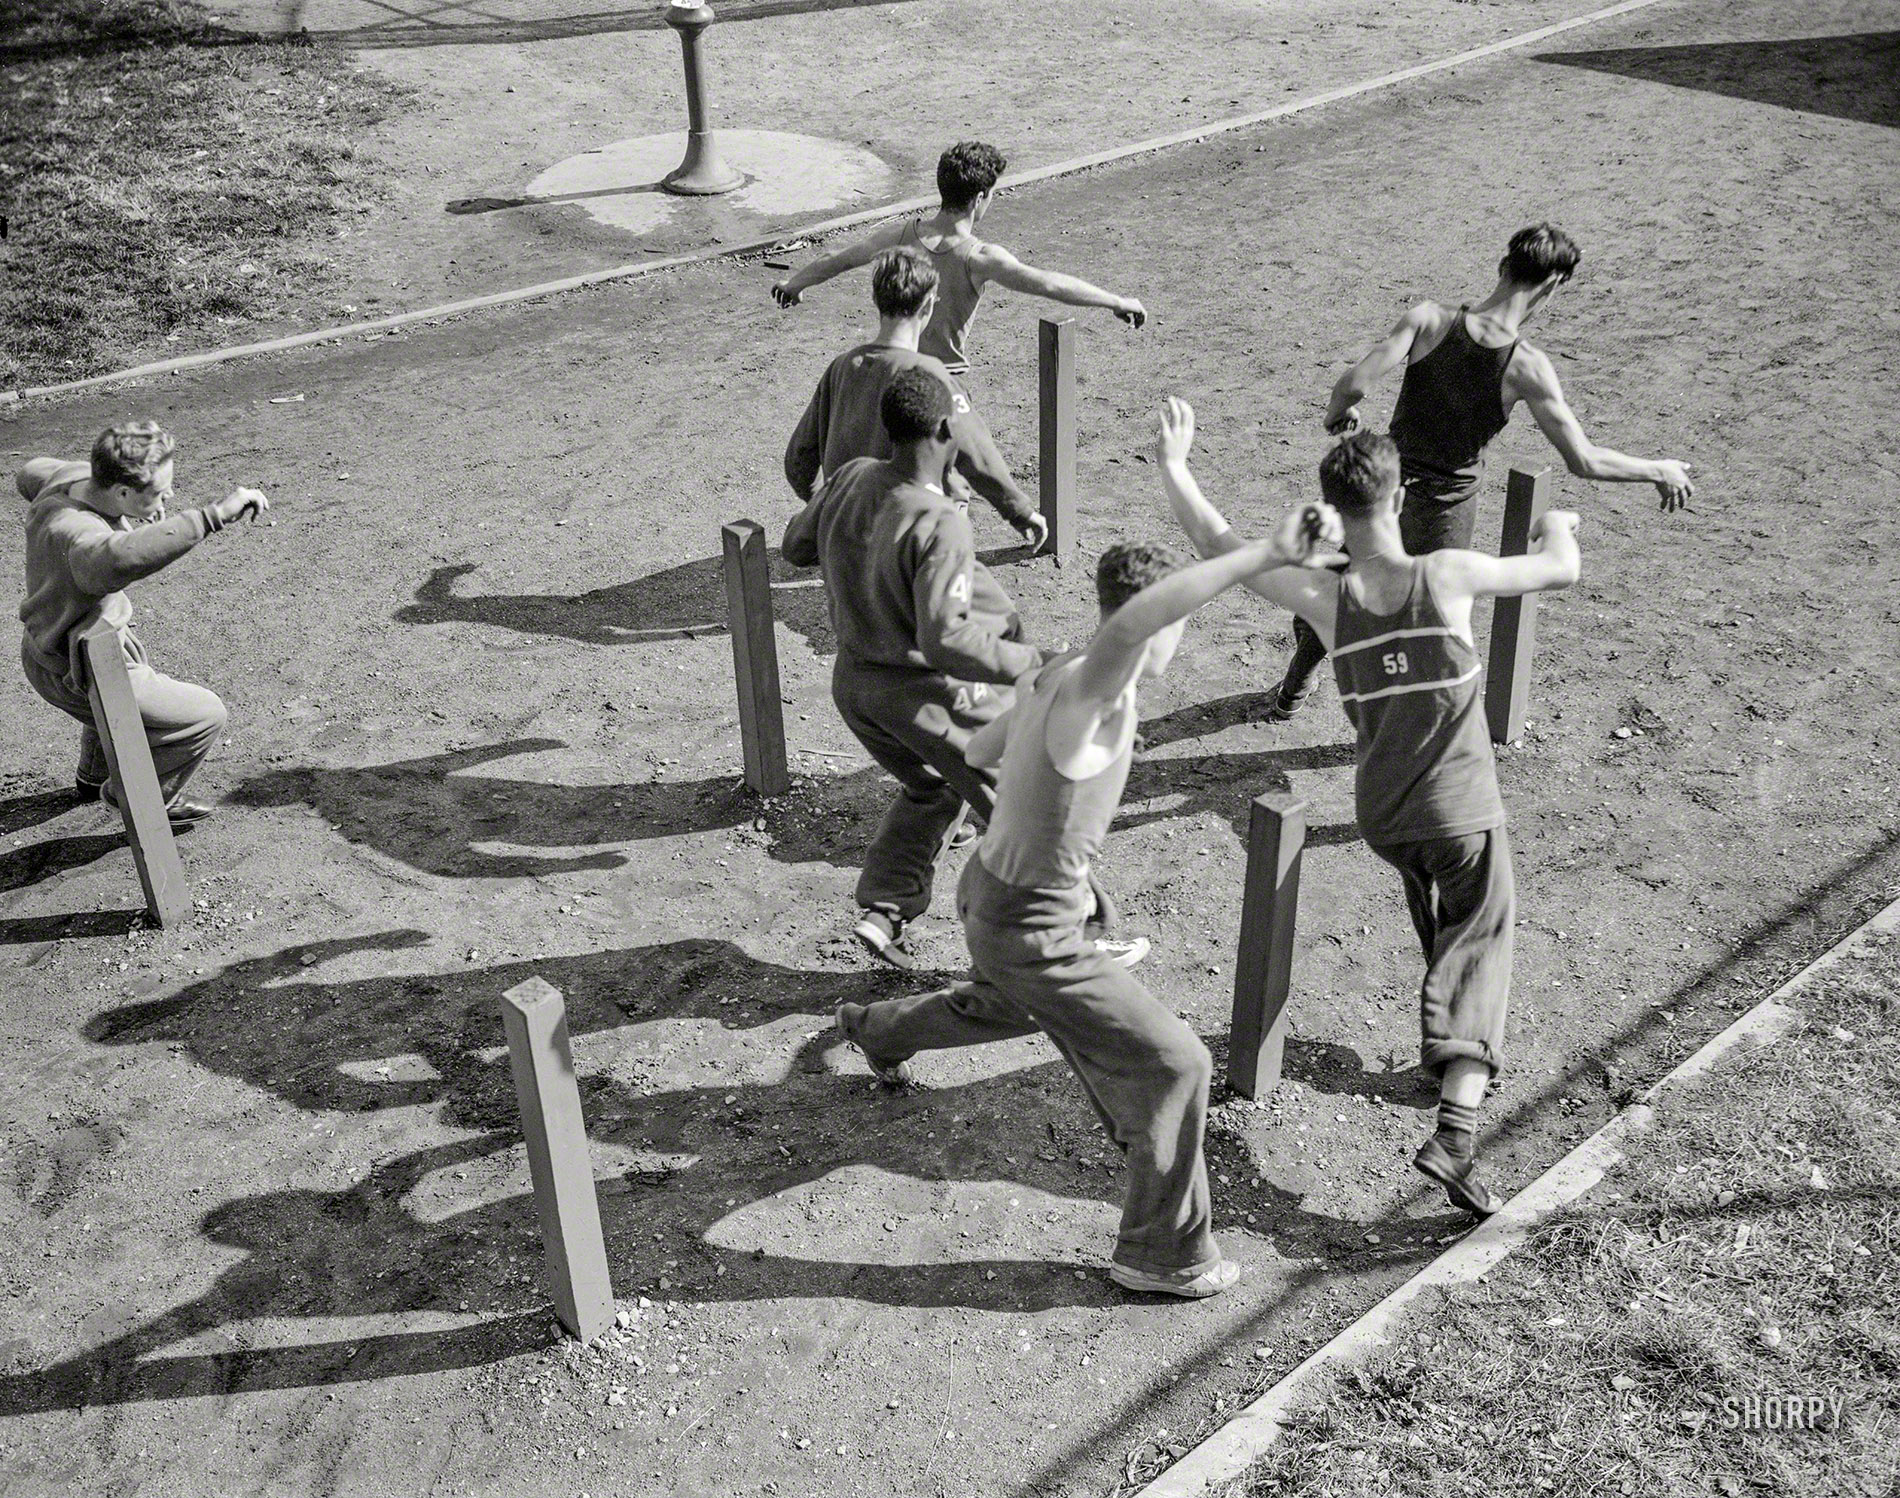 October 1942. "Benjamin Franklin High School, New York, New York. Victory Corps. High school boys growing physically fit through exercise." Medium format negative by William Perlitch for the Office of War Information. View full size.